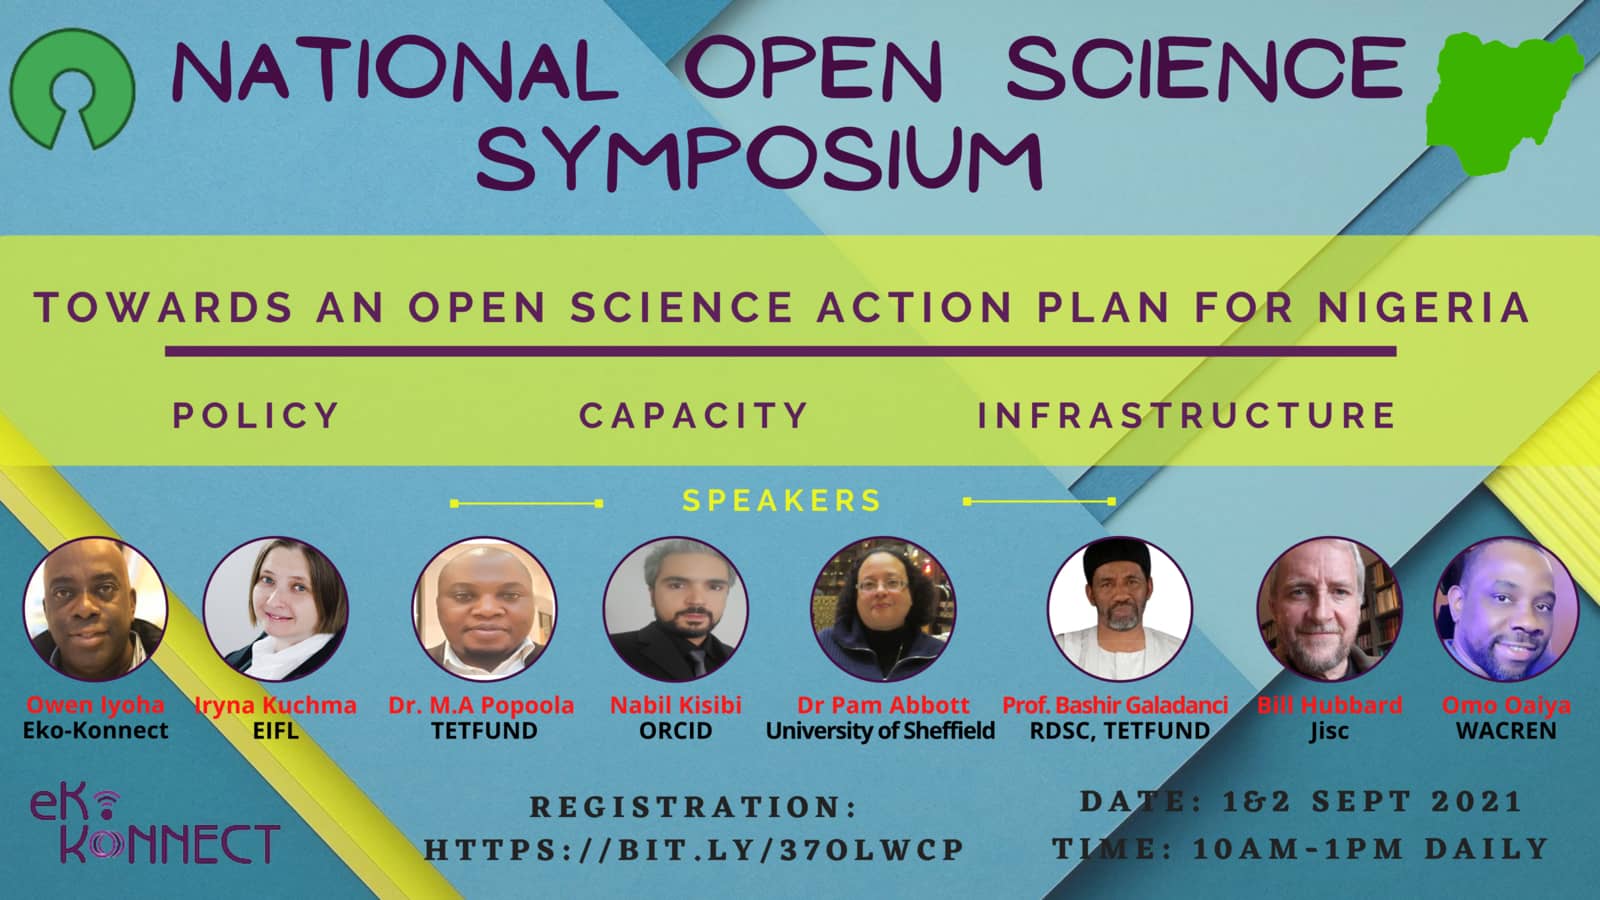 Nigeria Makes Steps To Advance Open Science With National Symposium